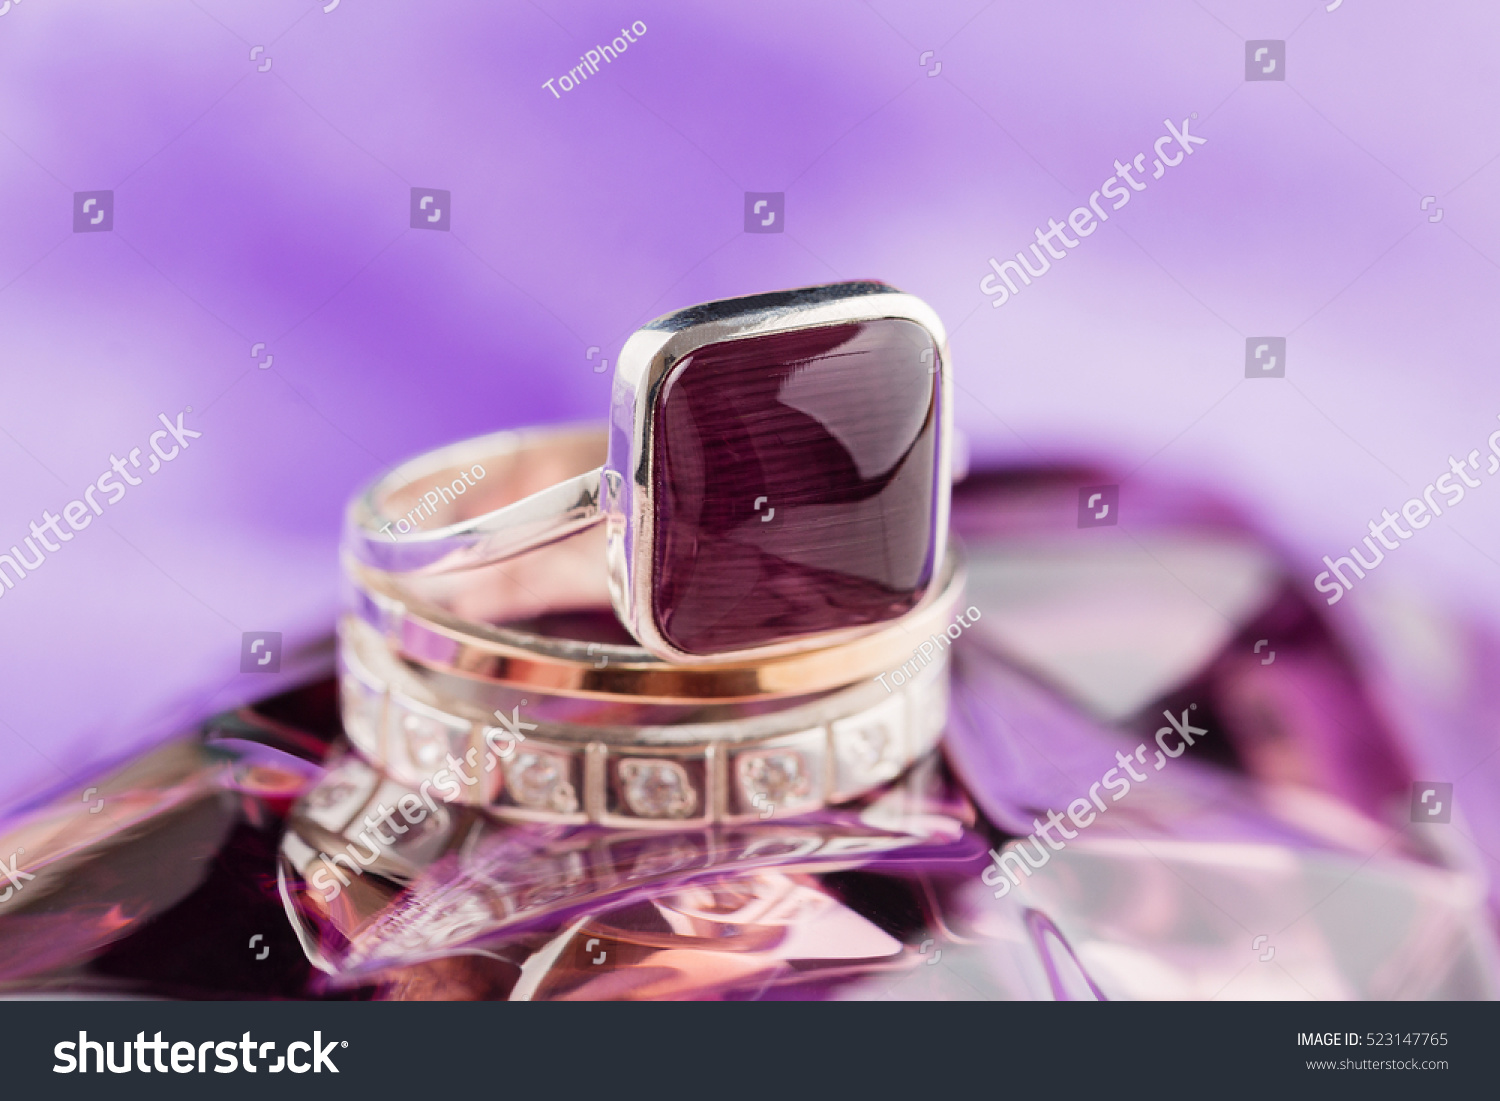 https://www.shutterstock.com/pic-523147765/stock-photo-gold-ring-square-shaped-with-purple-gemstones-on-violet-background.html